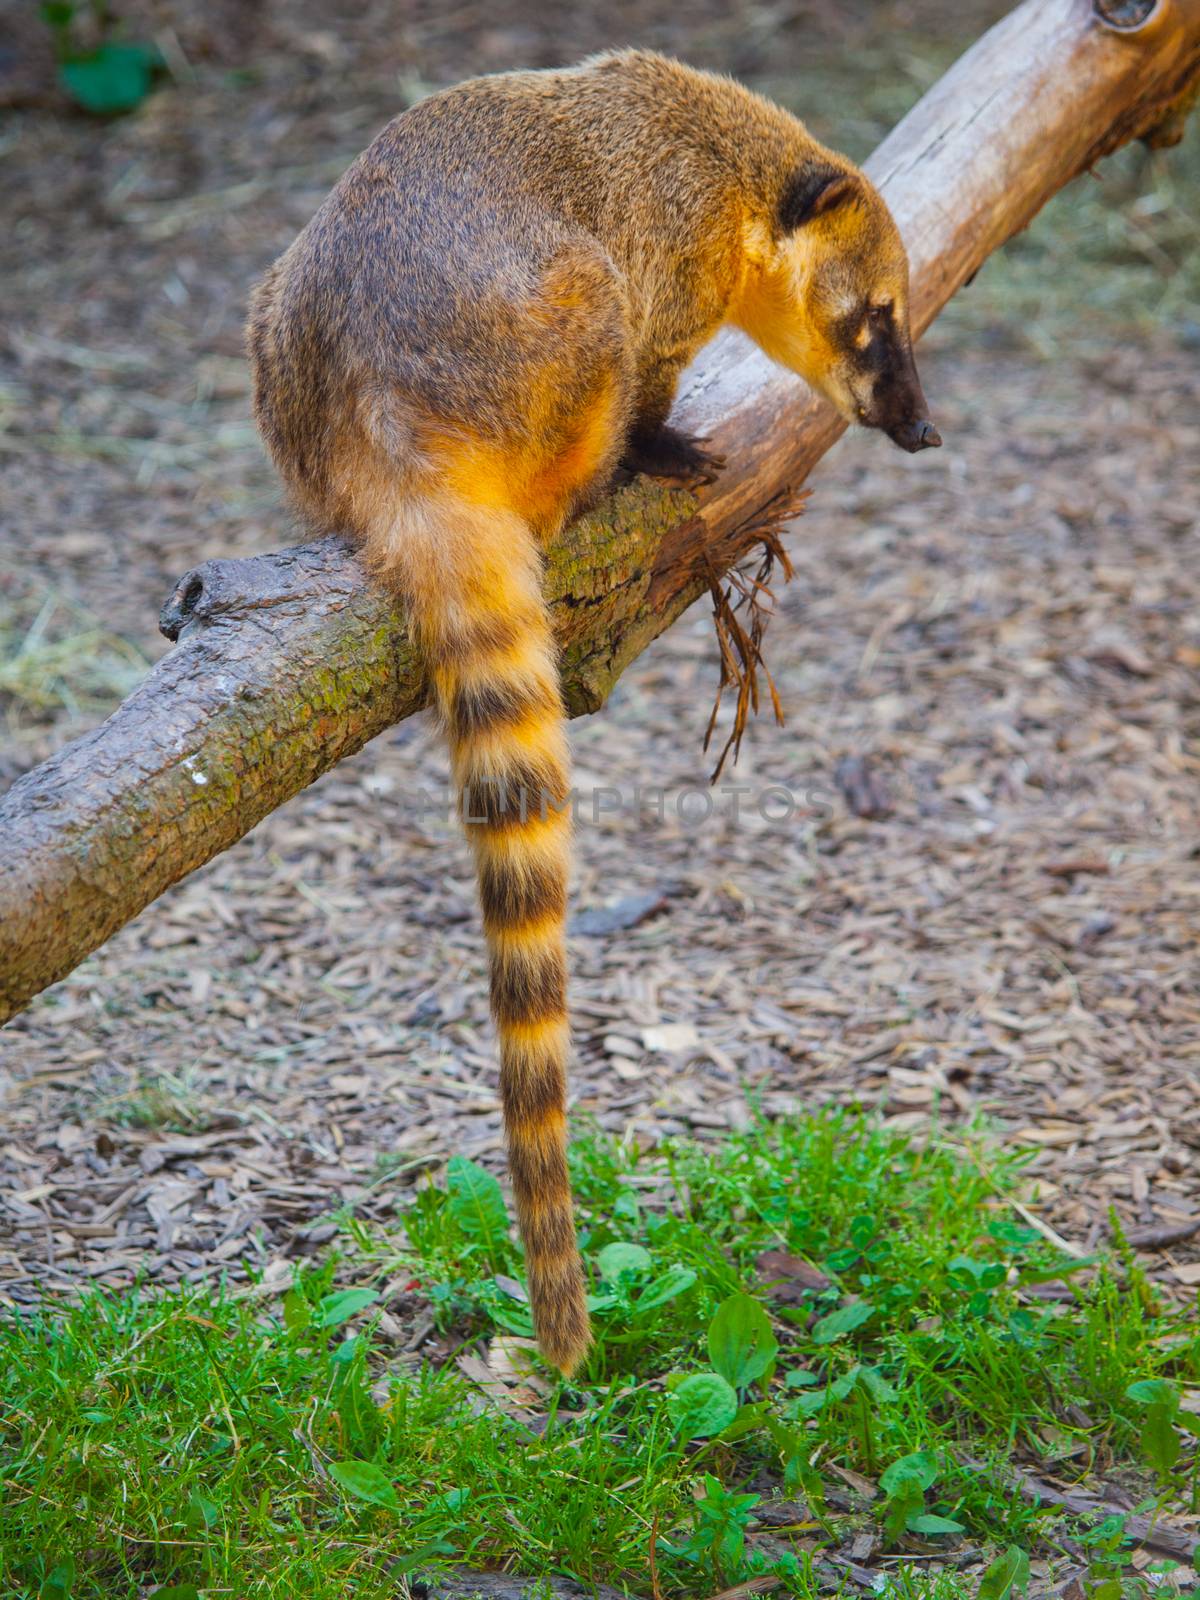 Coati sitting on the branch by pyty